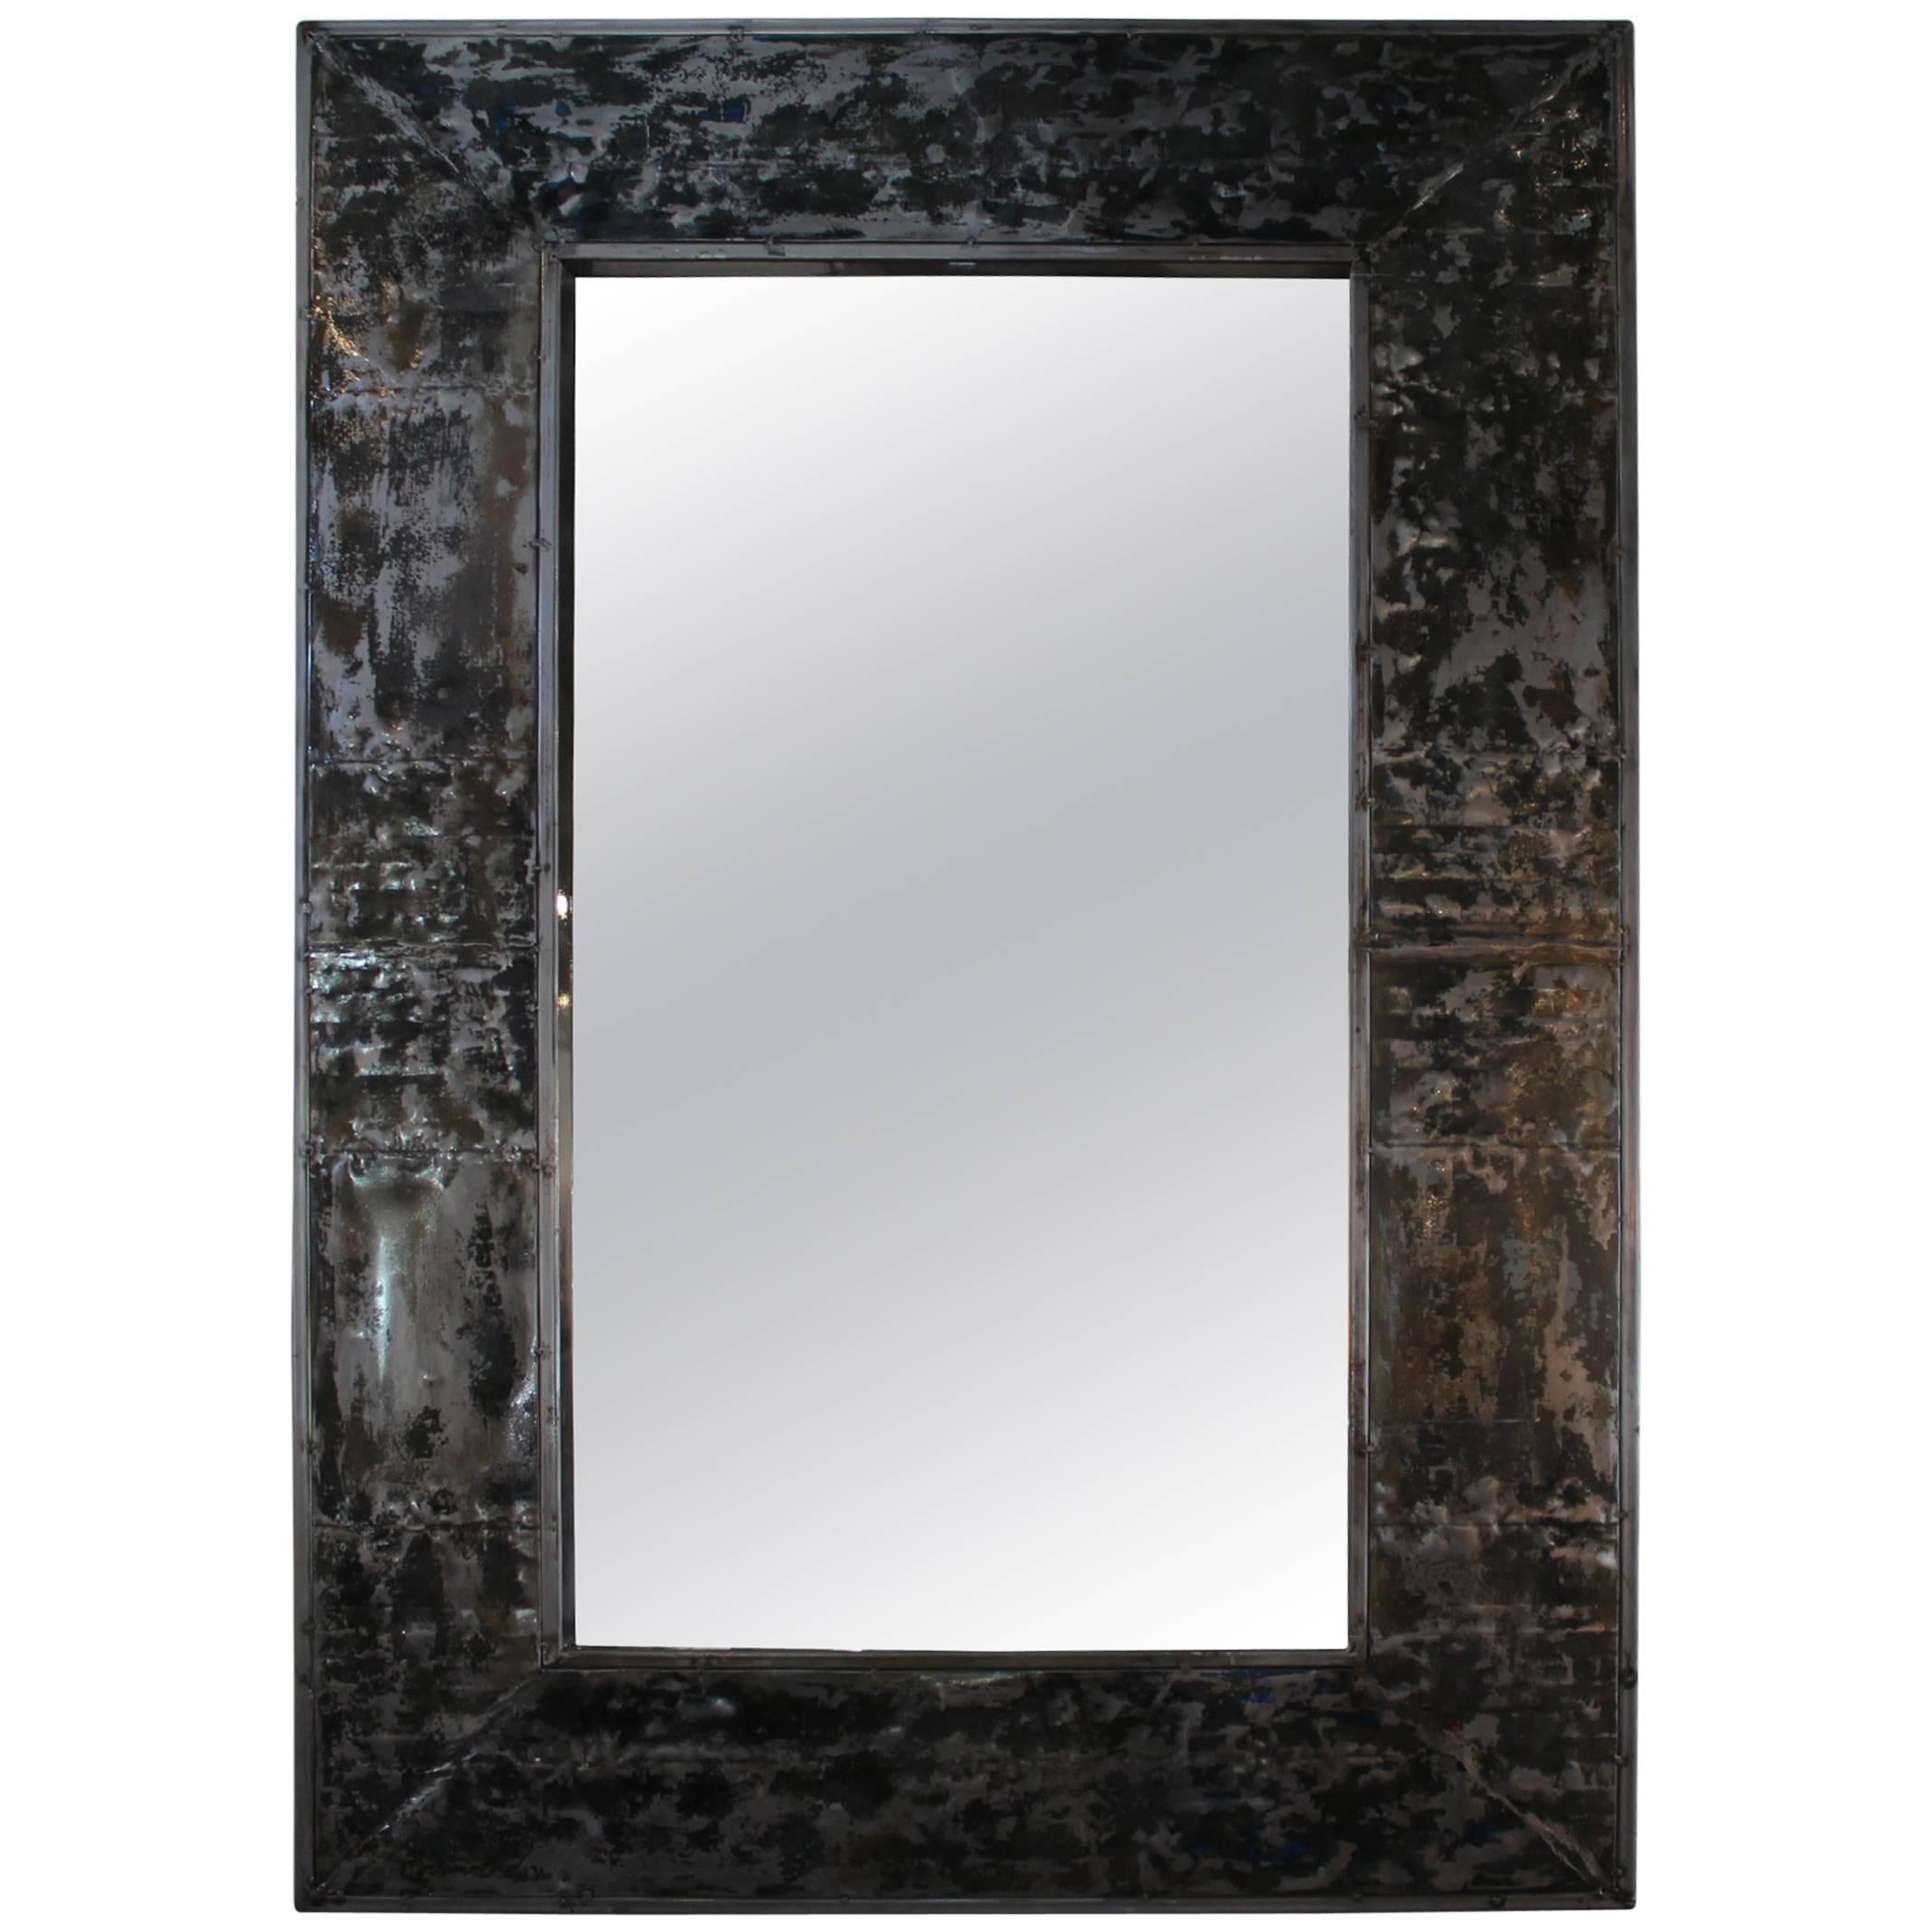 Mirror Frame Crafted from Reclaimed Painted Zinc